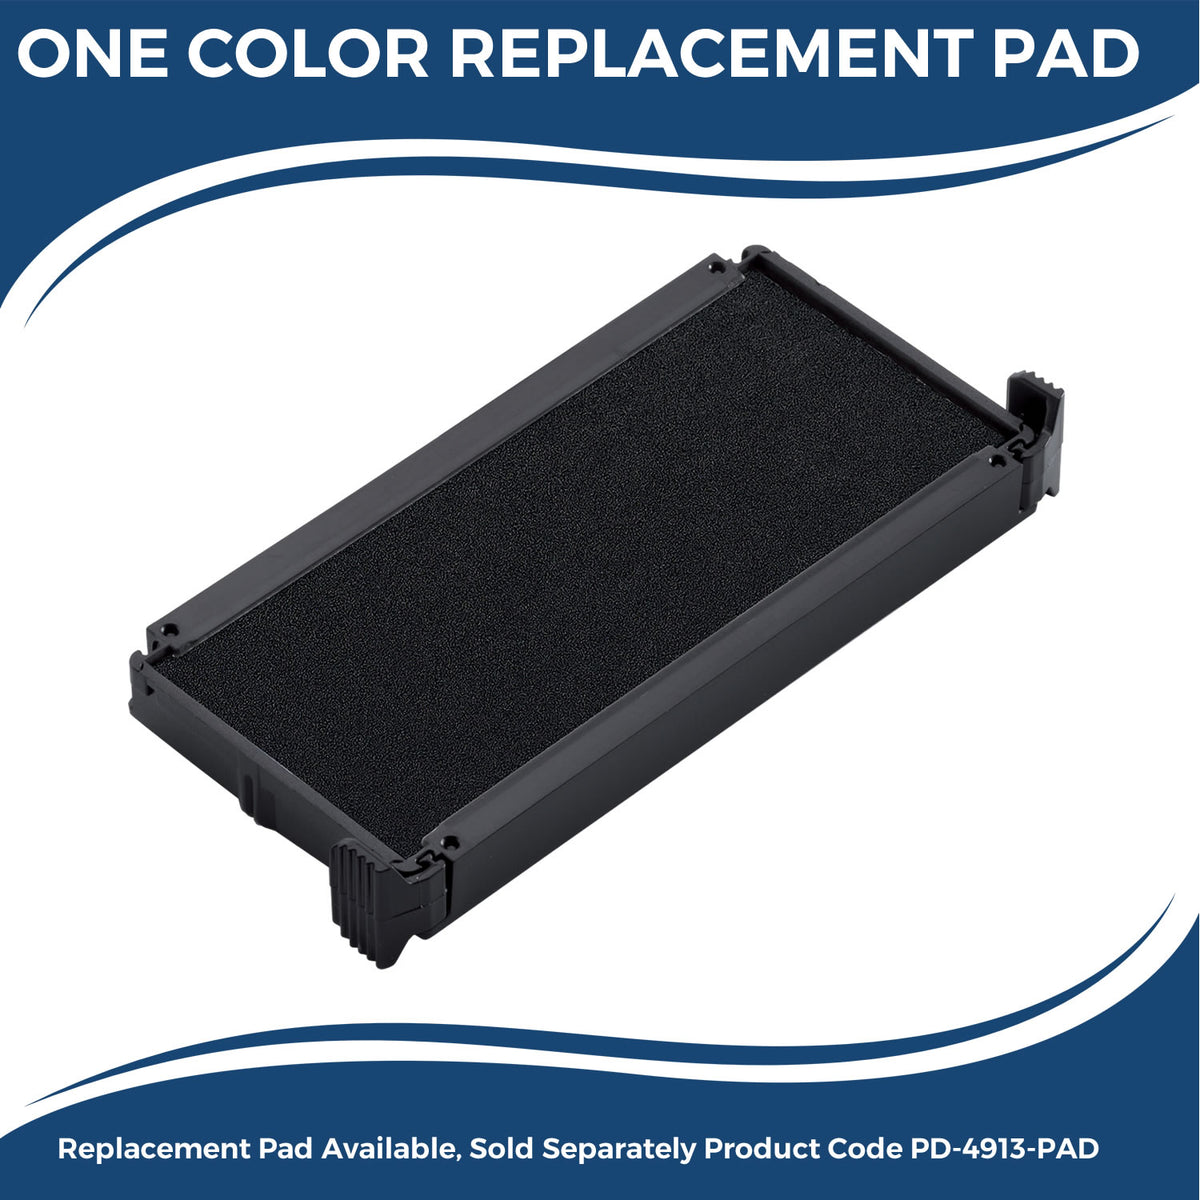 Large Self-Inking Barcode Confidential Stamp 4884S Large Replacment Pad